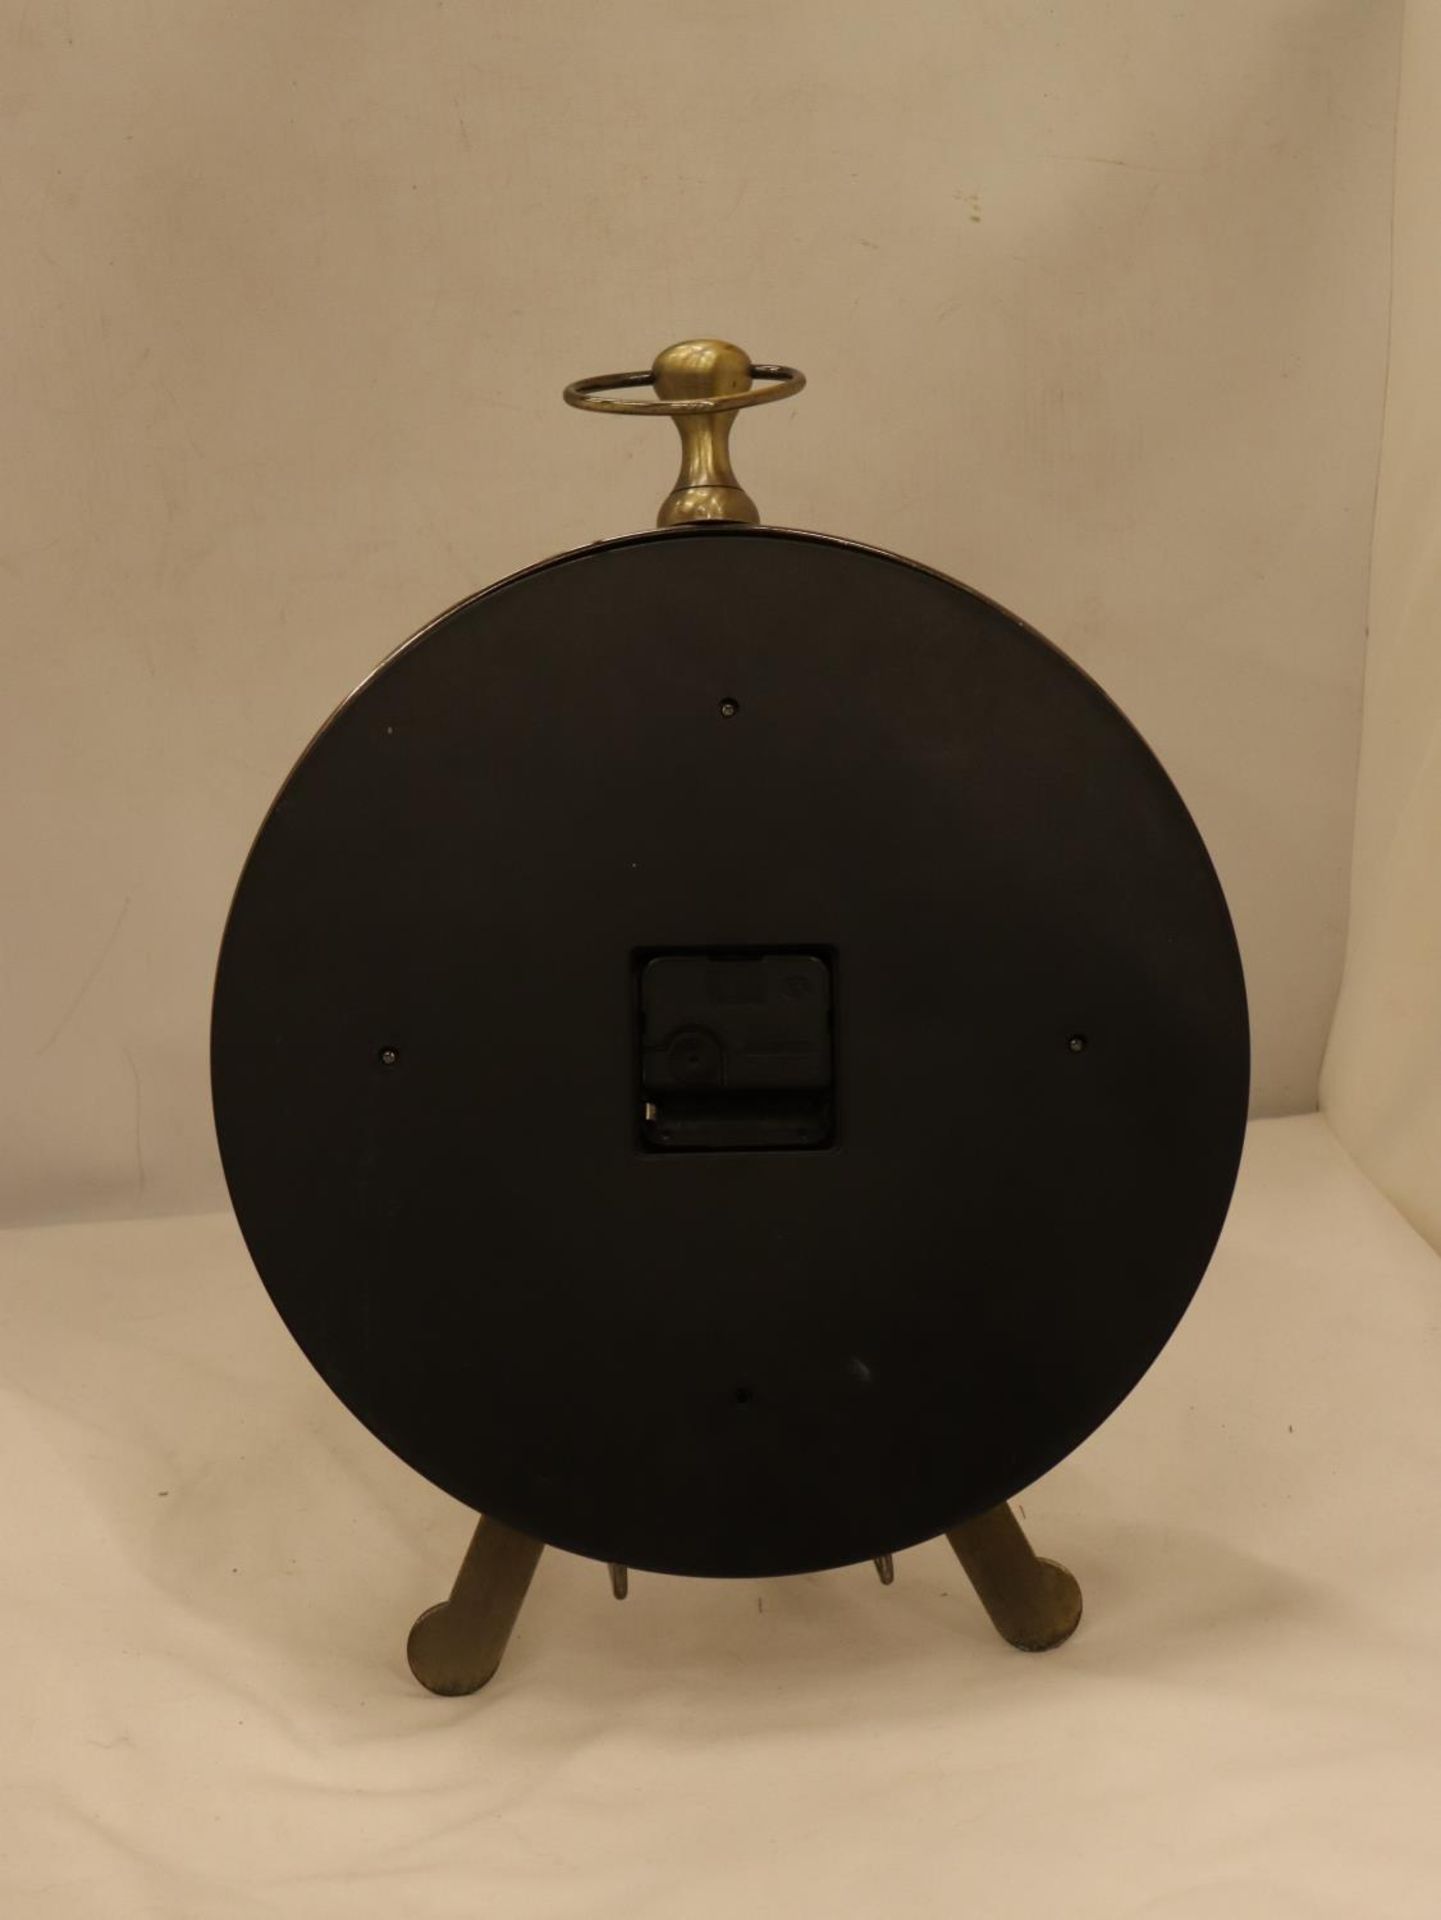 A LARGE POCKET WATCH CLOCK ON A STAND, HEIGHT 36CM - Image 2 of 3